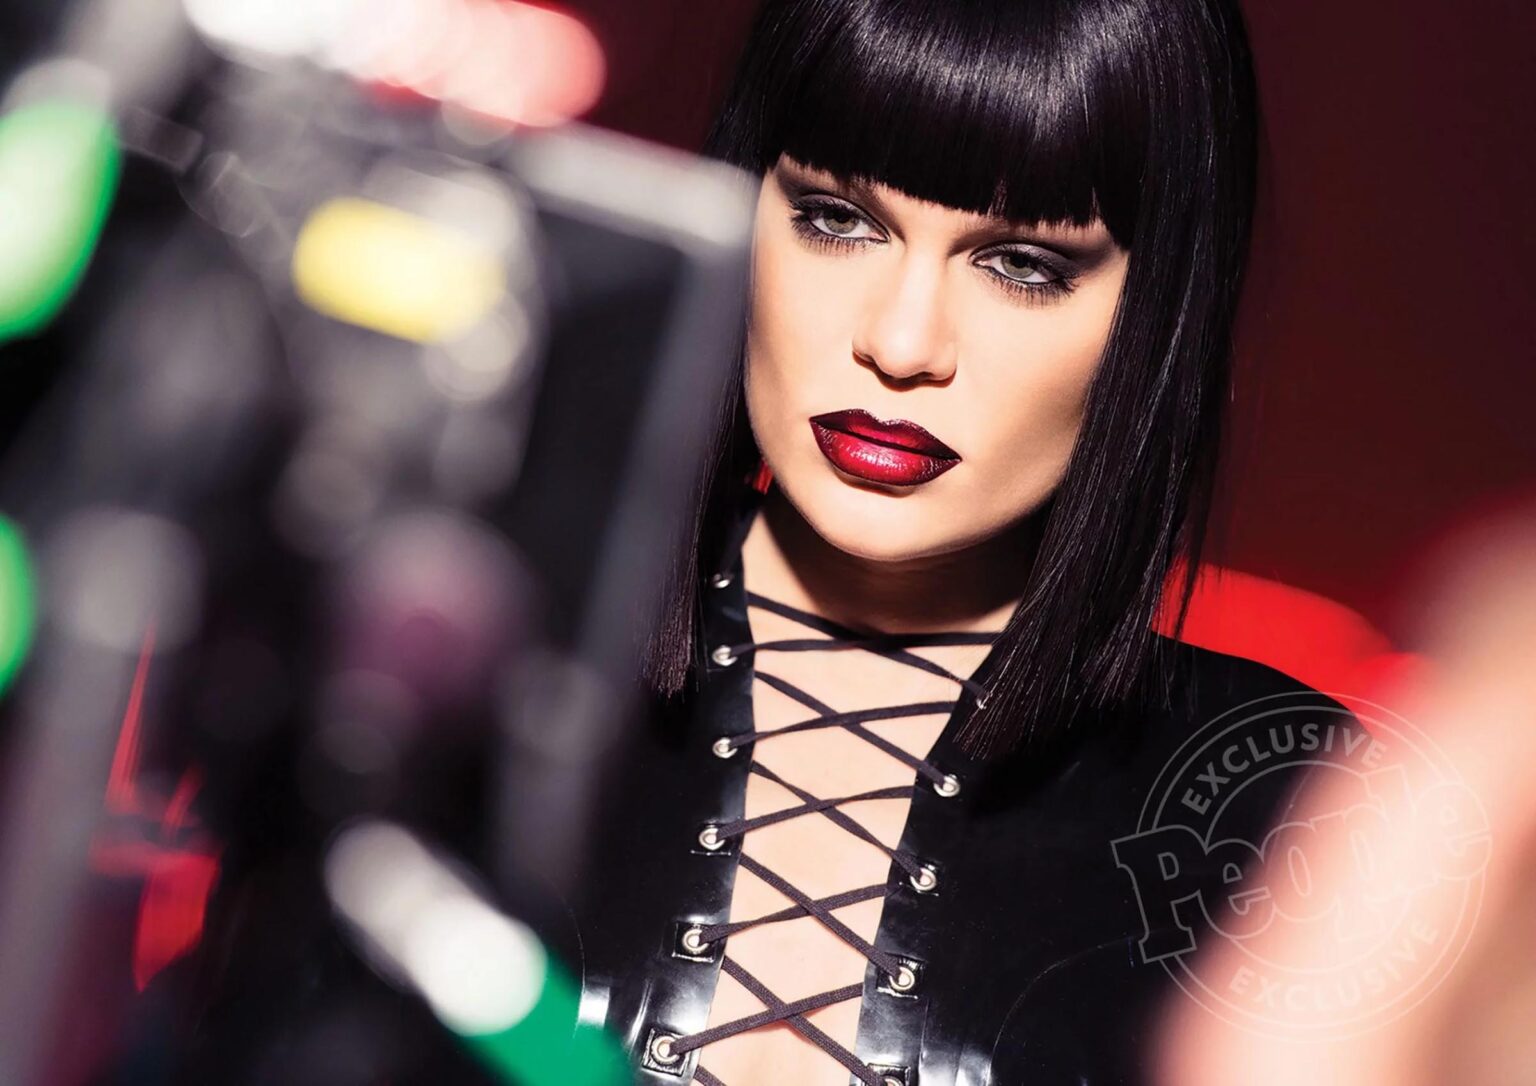 Renowned pop singer Jessie J was hospitalized on Christmas Eve with Ménière’s disease. Will the singing star lose her hearing?